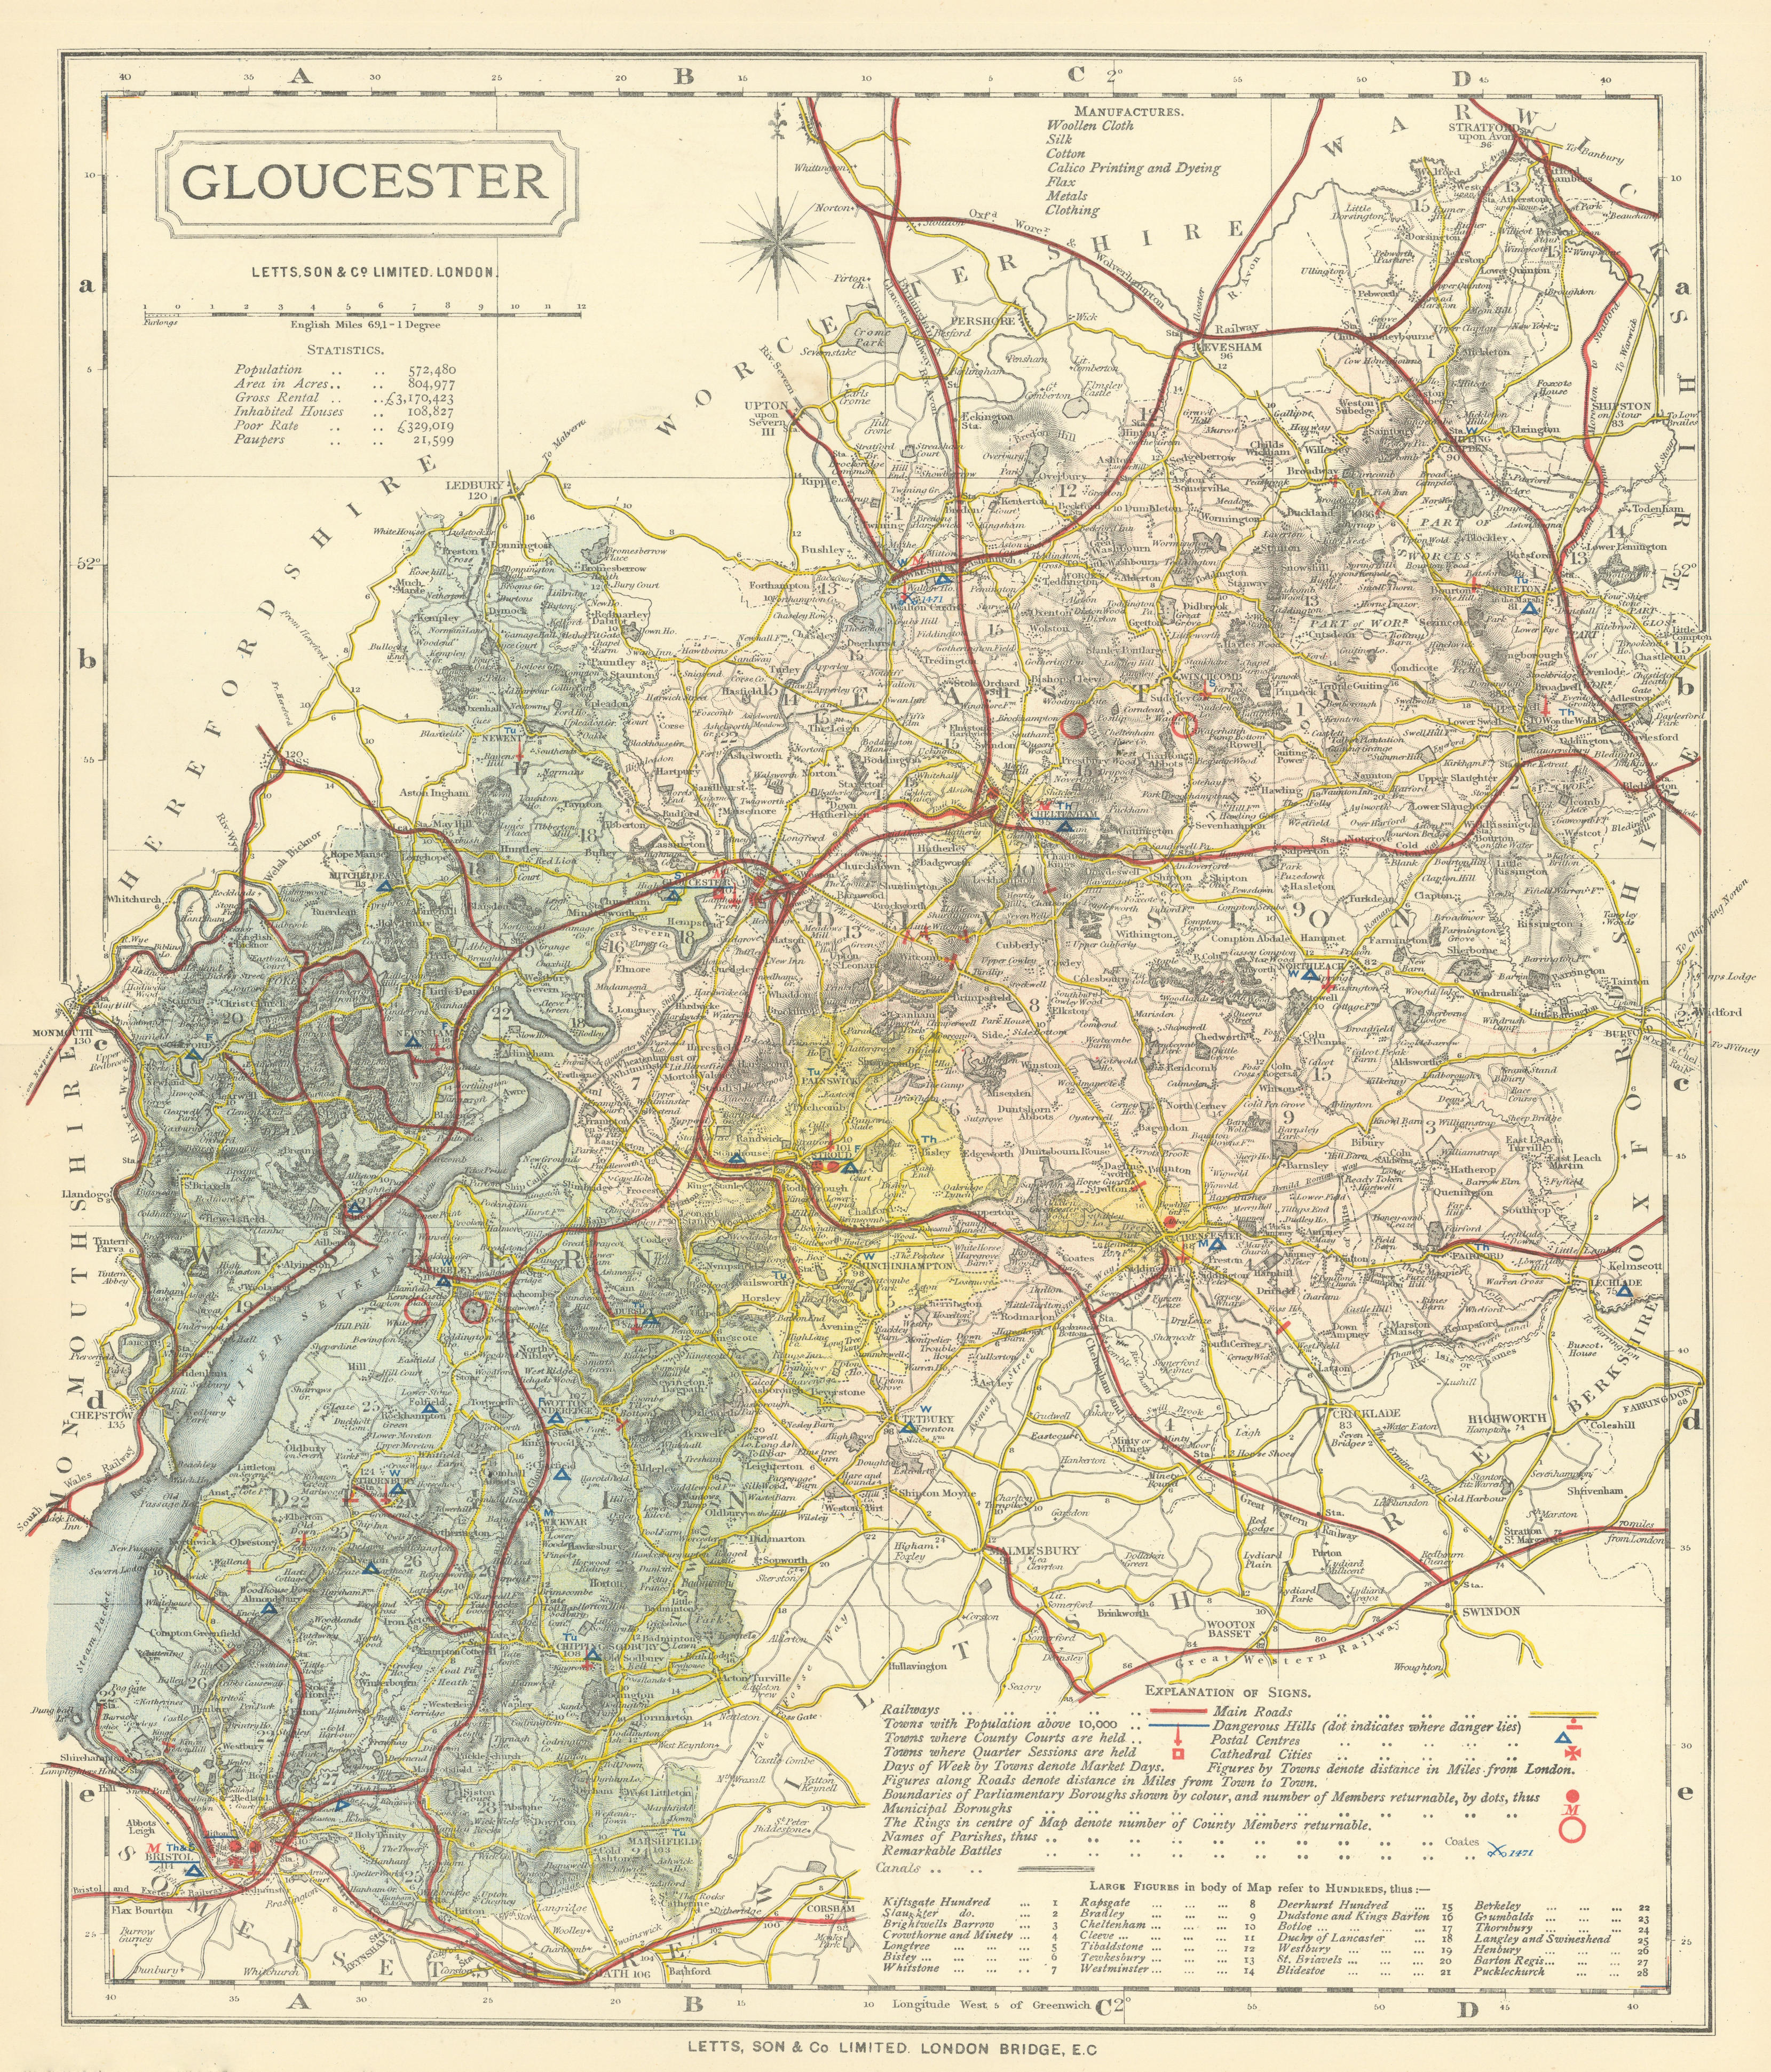 Associate Product Gloucestershire county map showing Post Towns & Market Days. LETTS 1884